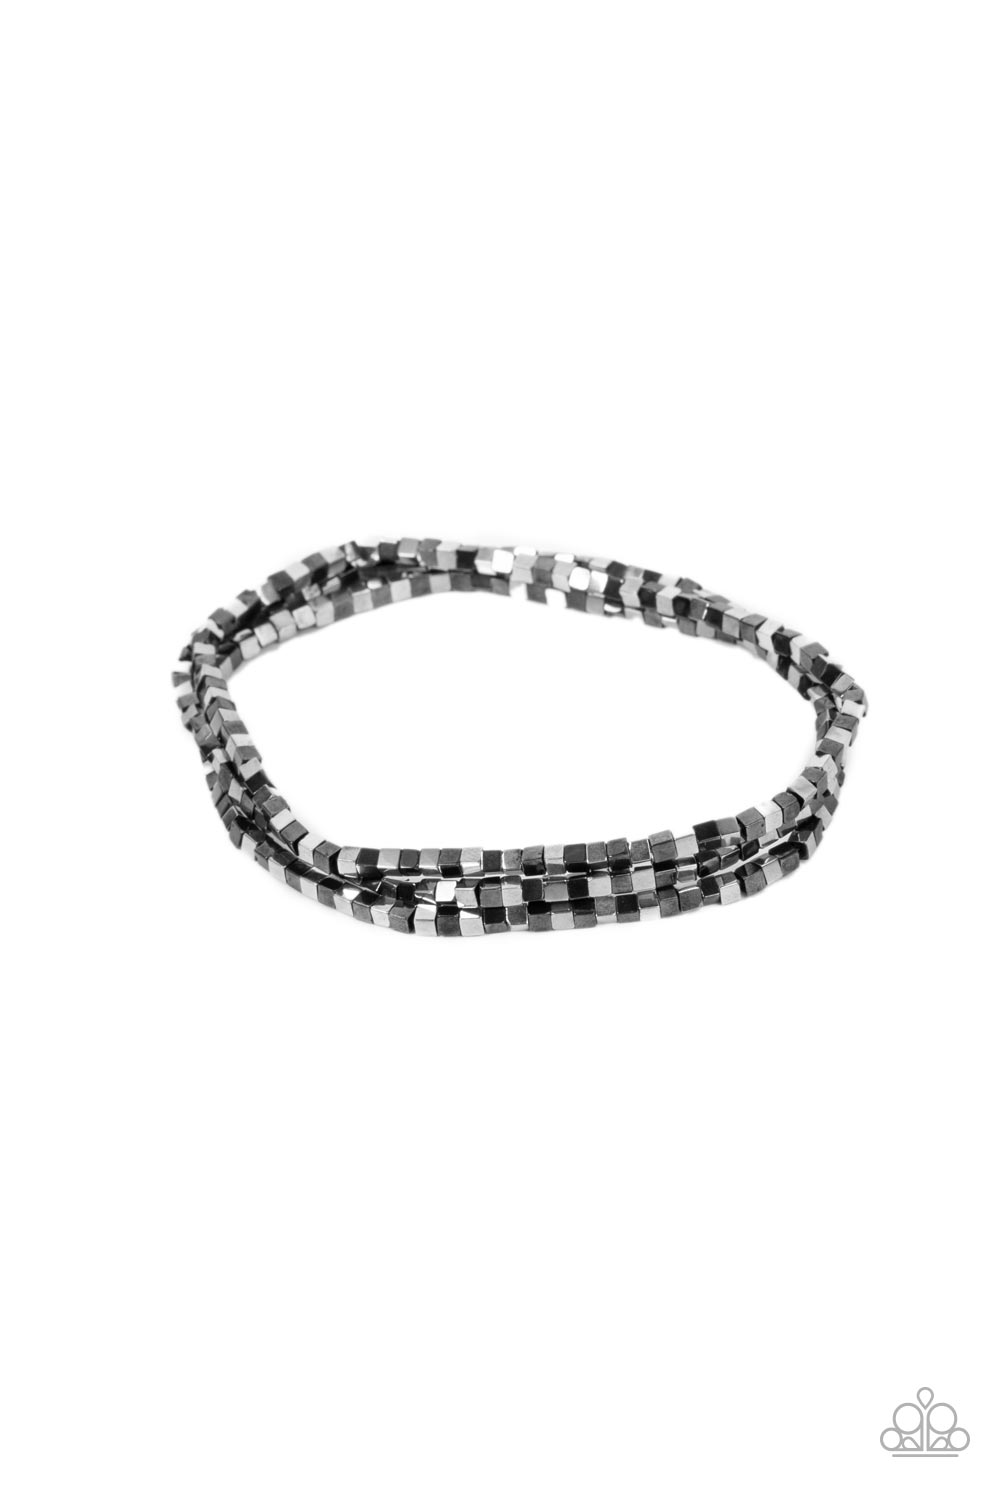 Block Bash Multi Bracelet - Paparazzi Accessories  A dainty collection of silver and gunmetal cube beads alternates along stretchy bands, stacking into edgy layers around the wrist.  Sold as one set of three bracelets.